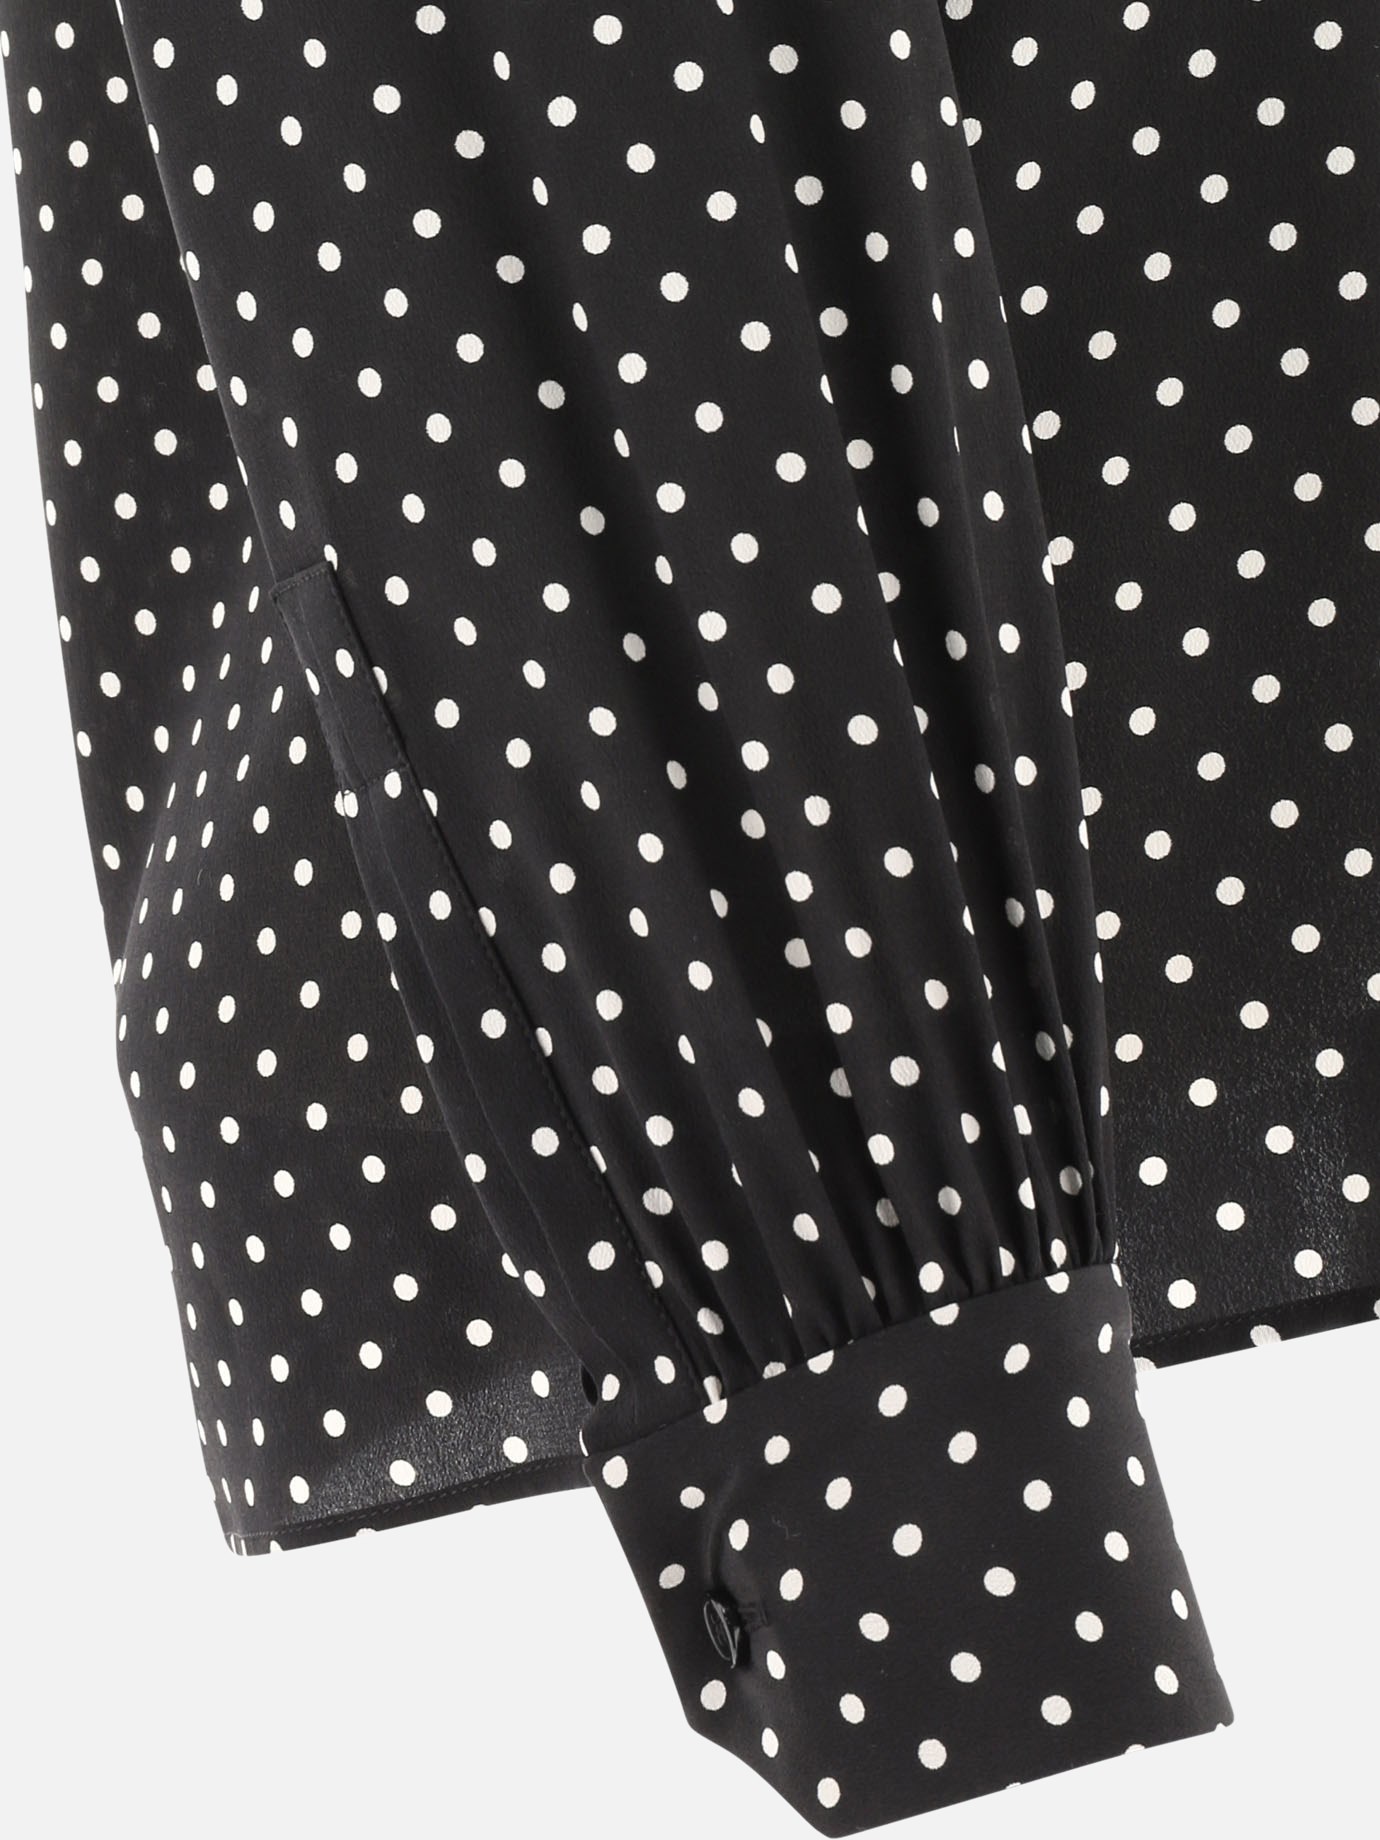 Polka dot blouse with bow by Saint Laurent